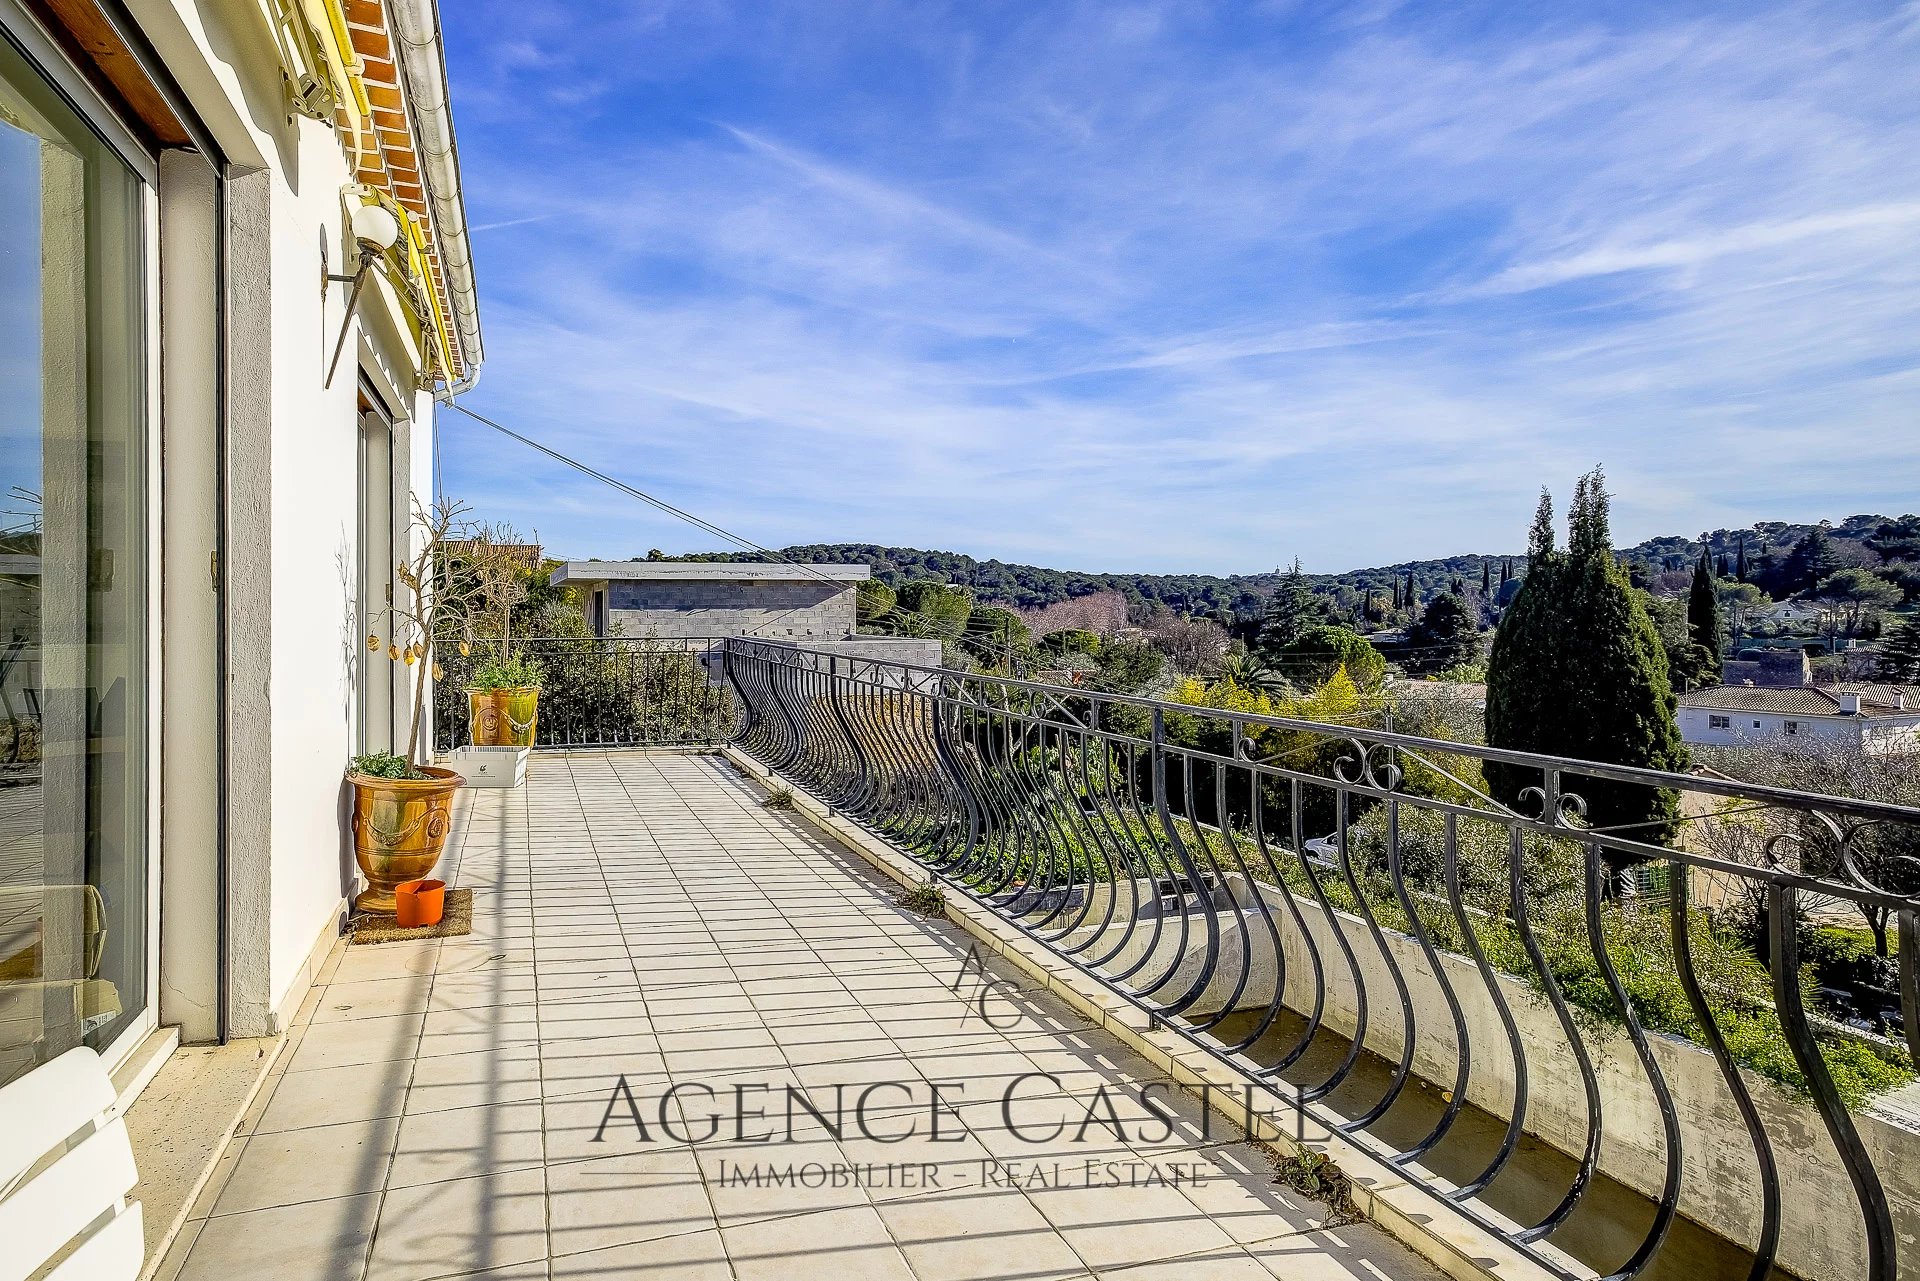 MOUGINS - 4 BEDROOM VILLA WITH SWIMMING POOL AND GARDEN